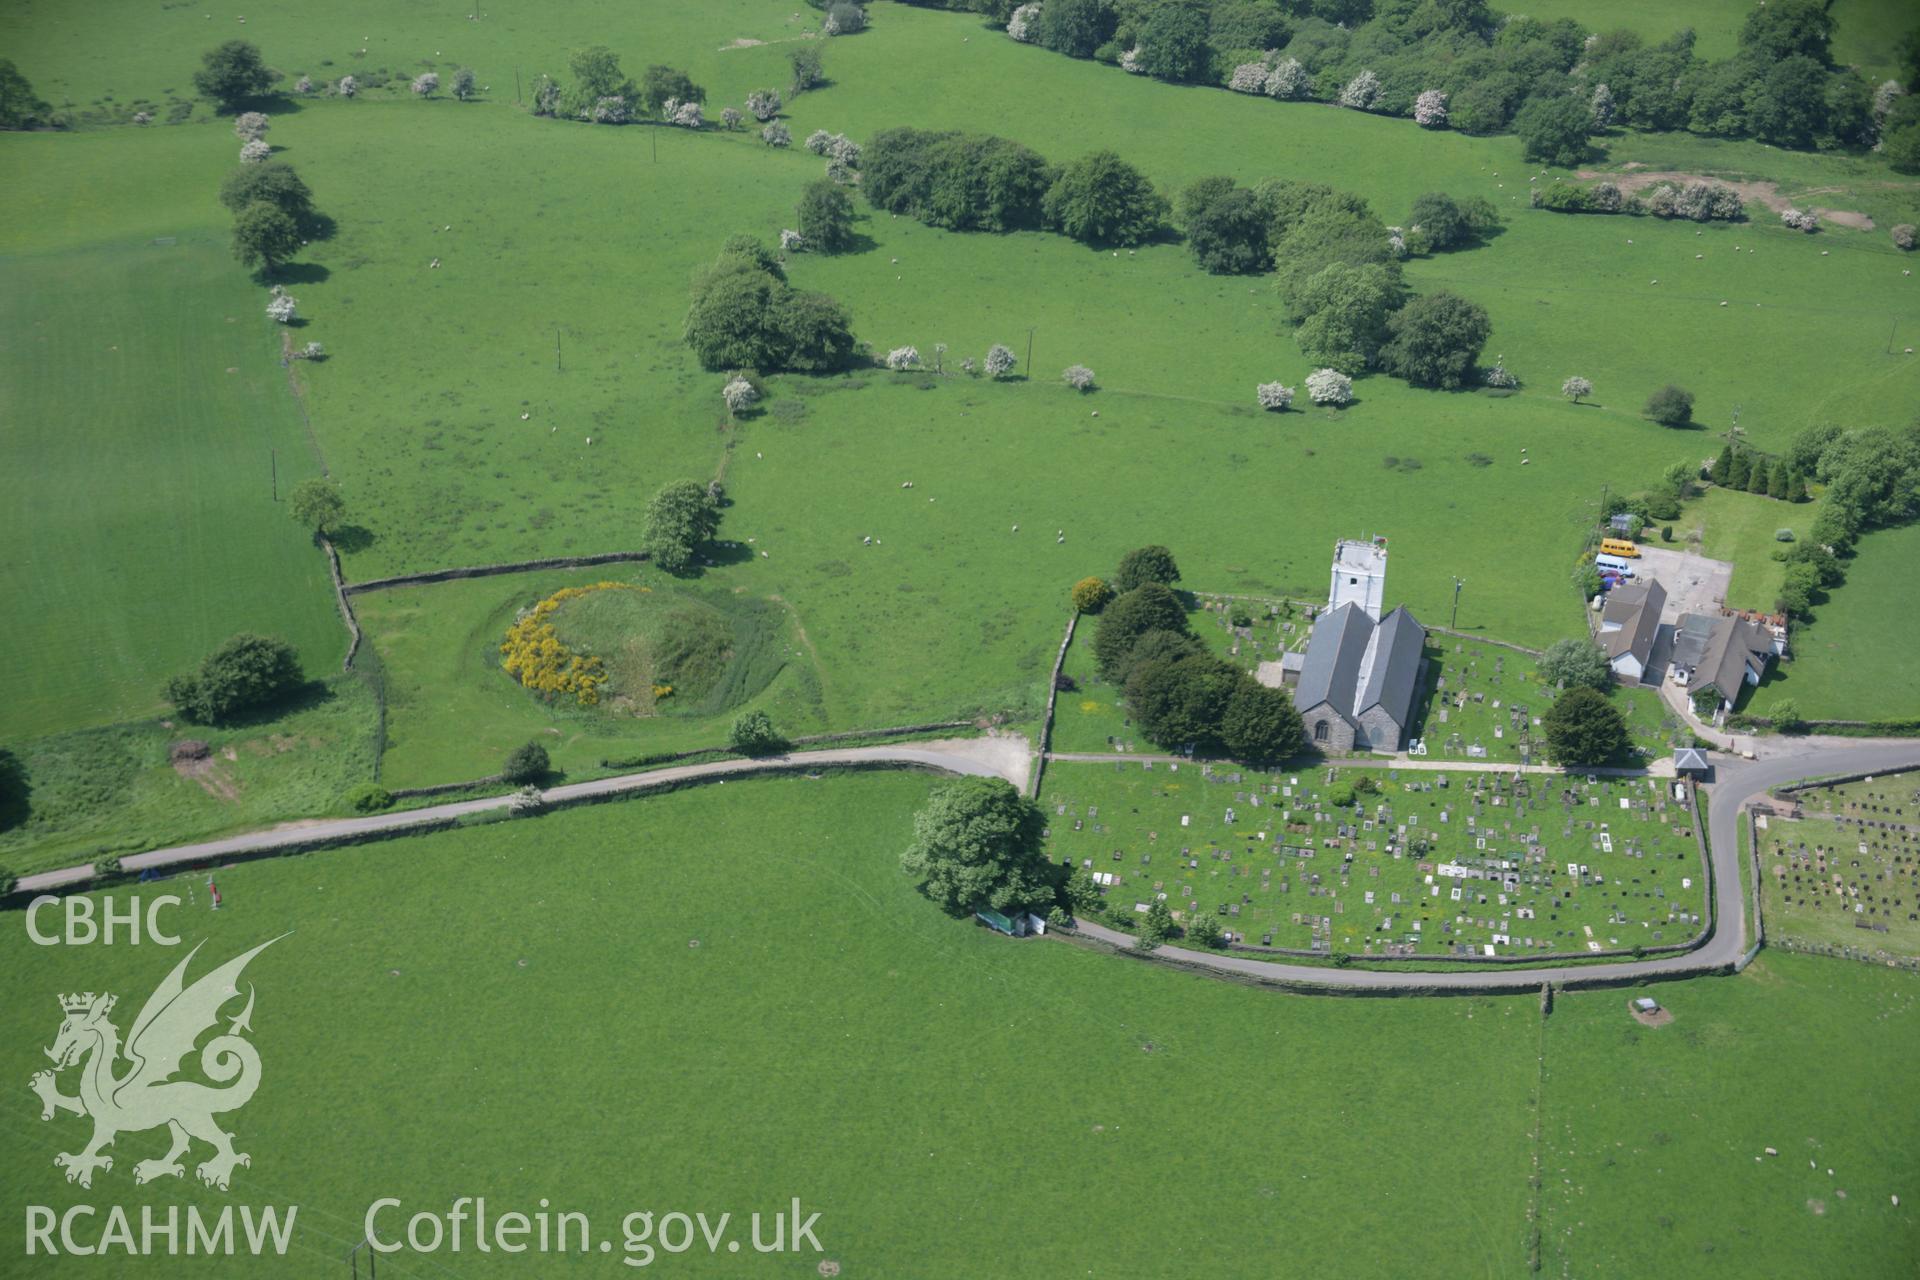 RCAHMW colour oblique aerial photograph of Twyn Tudur Motte from the east. Taken on 09 June 2006 by Toby Driver.